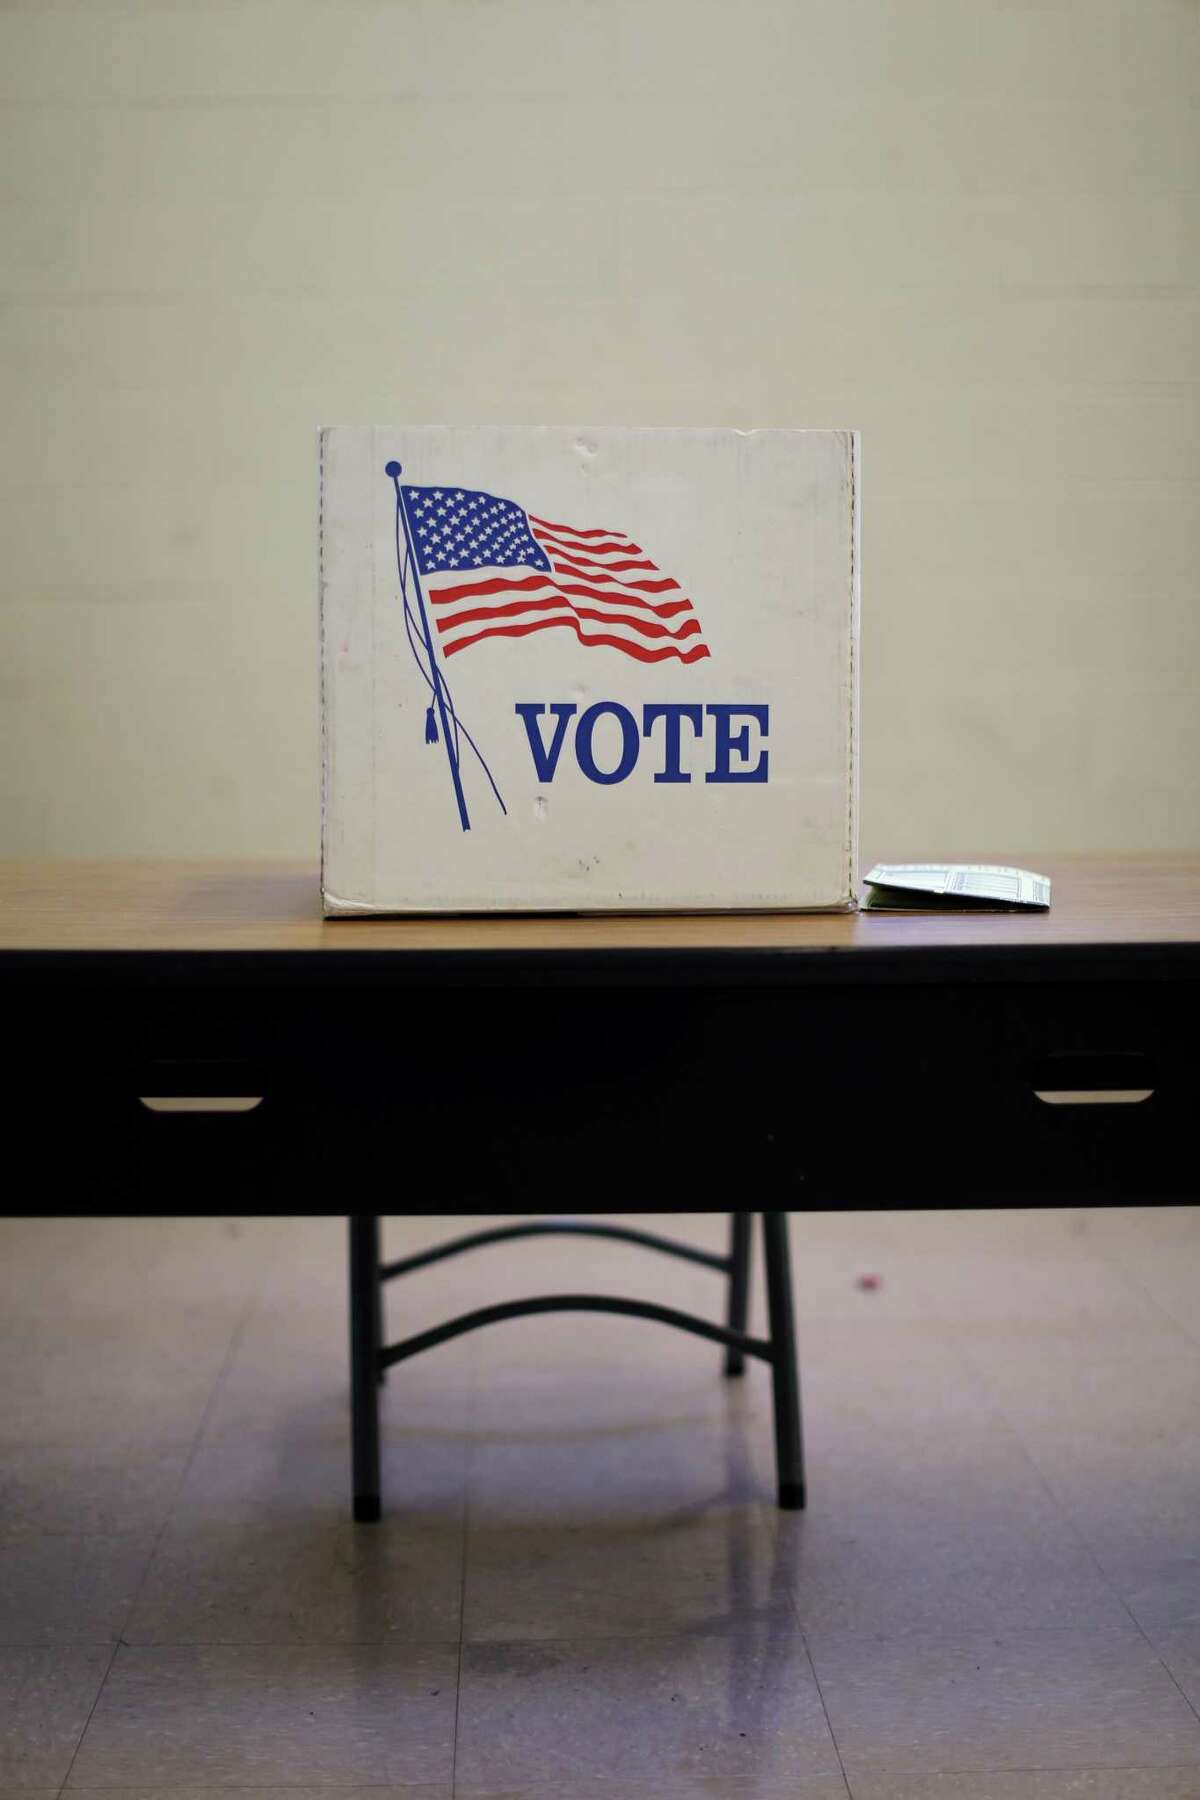 FILE - A voting booth at a polling station in Charlotte, N.C., Nov. 8, 2016. ?’Senator Chuck Schumer, the majority leader, has indicated that he plans to schedule a vote for Wednesday to open debate on a new voting rights bill, the Freedom to Vote Act,?“ The New York Times columnist Charles M. Blow writes. (Travis Dove/The New York Times)